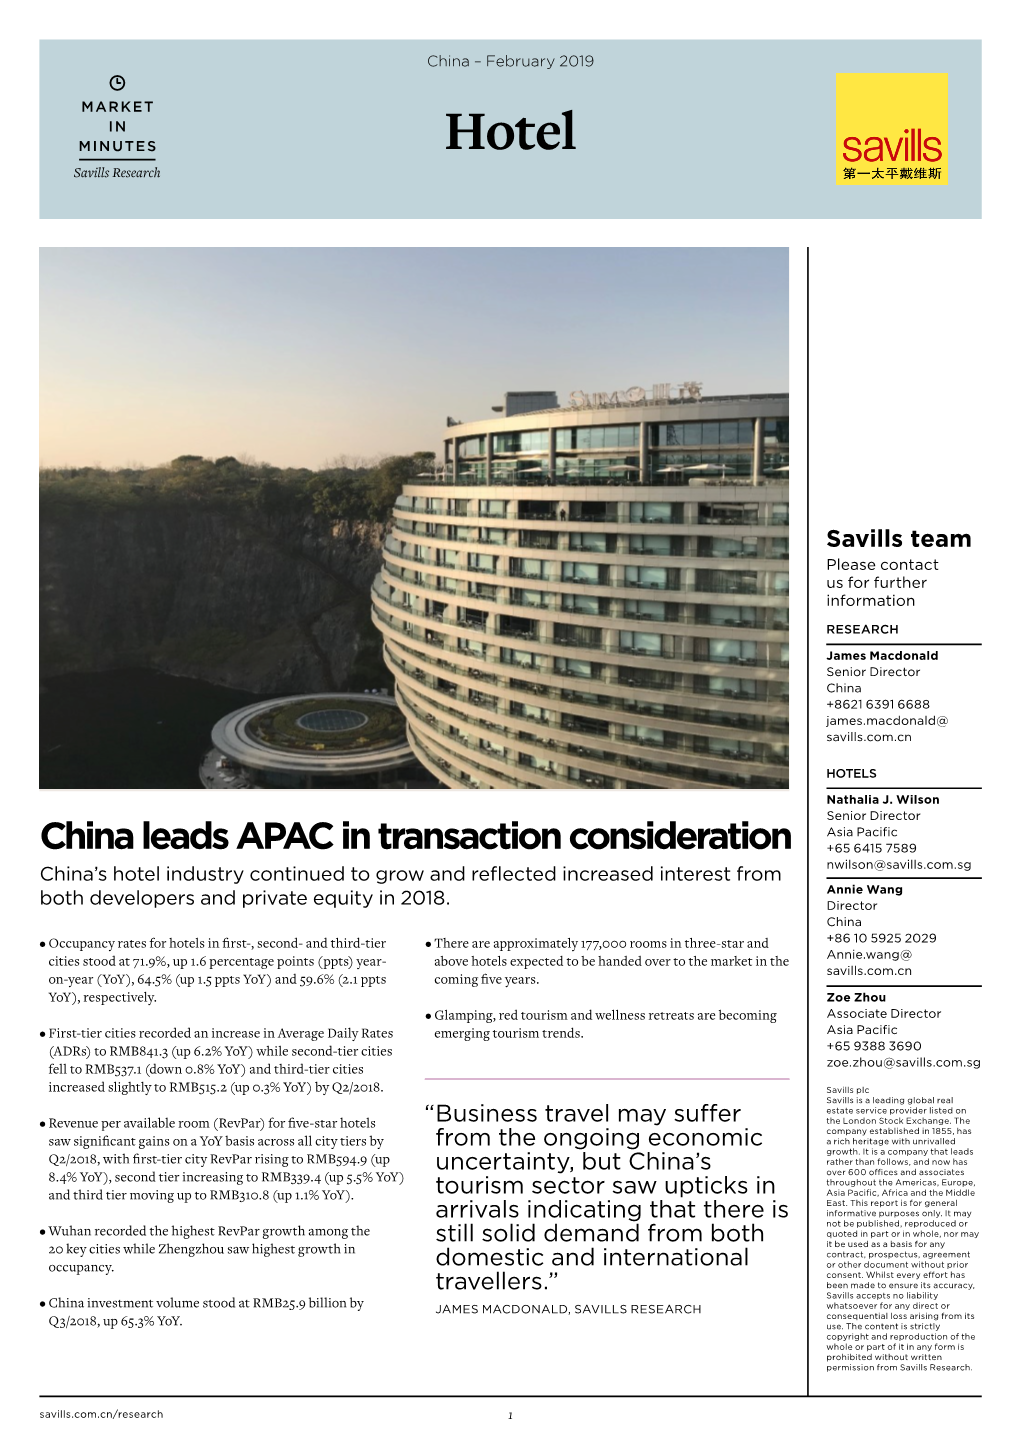 China Leads APAC in Transaction Consideration